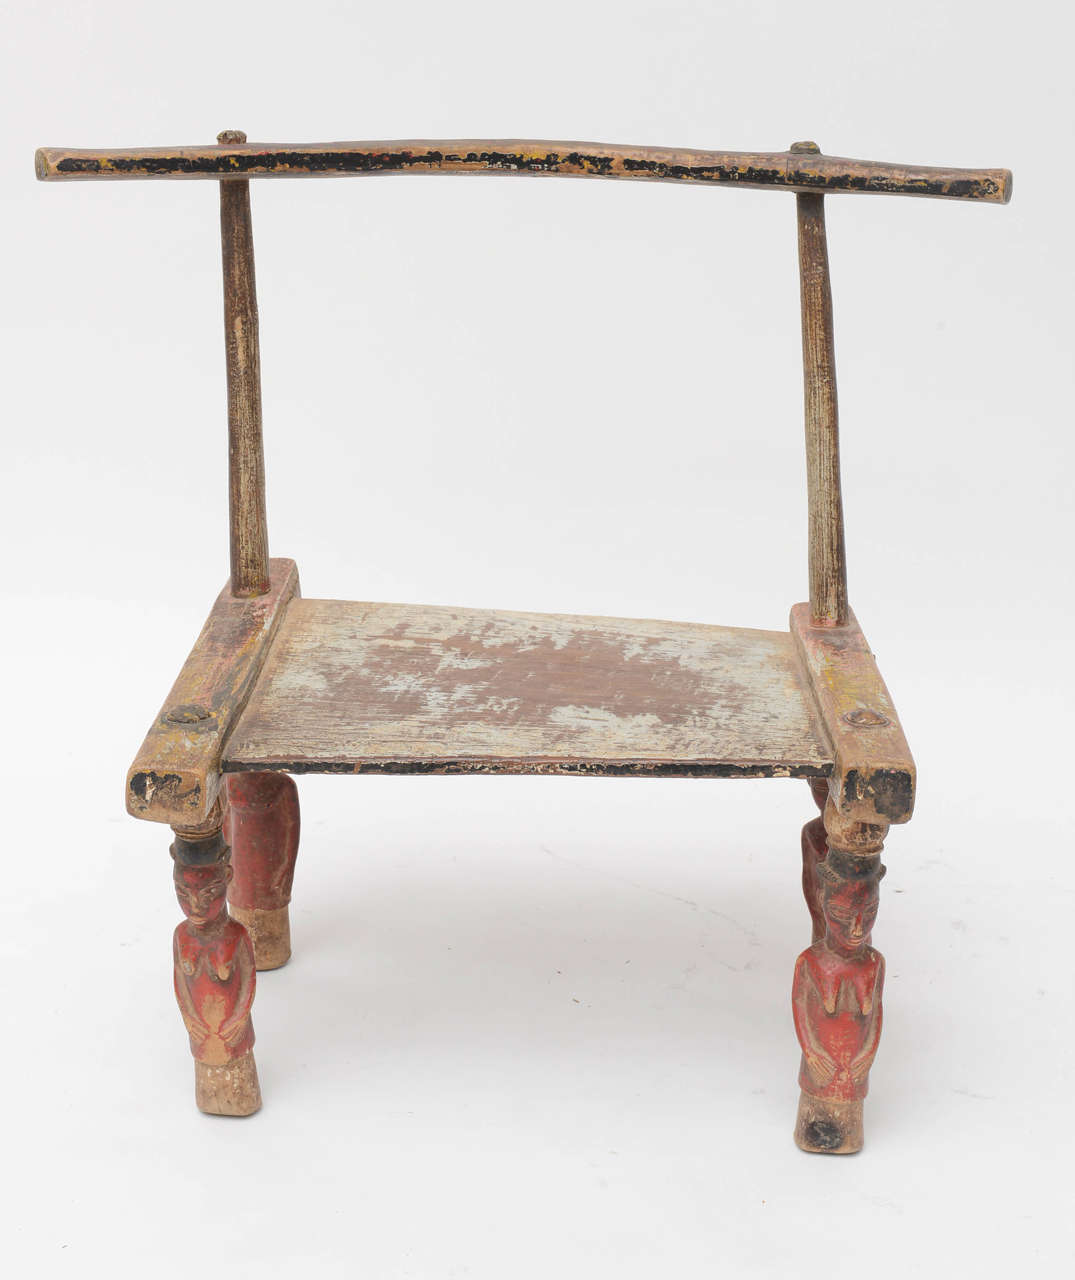 A wonderful chair, rich in patina and detail! Late 19th to early 20th century African chair, handmade by the Senufo people of Ivory Coast. Male and female painted and carved legs, remains of of original red, black, yellow and grey paint on seat and